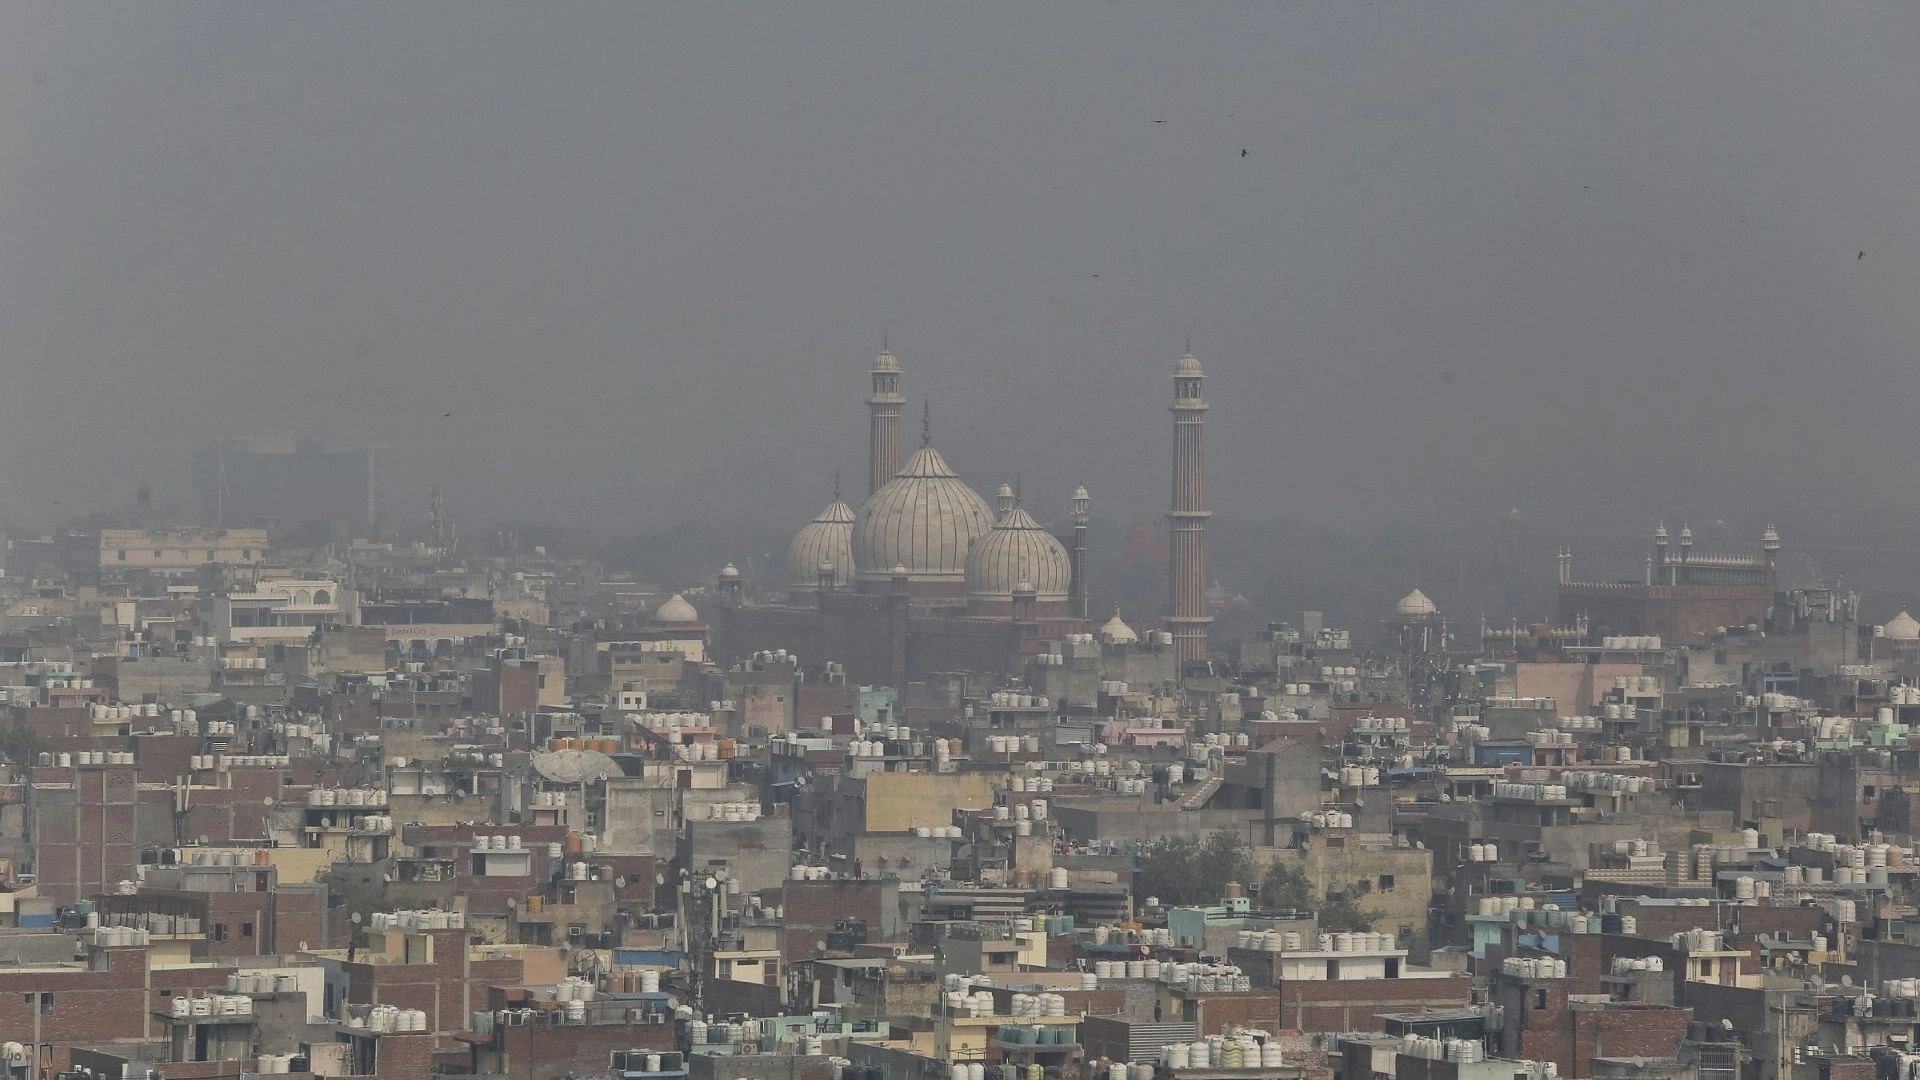 <div class="paragraphs"><p>For the third day in a row, on 2 November, Delhi recorded 'hazardous' air quality as smog tightened its grip on the national capital.</p><p>In Photo: Jama Masjid, engulfed in smog, in Delhi.</p></div>